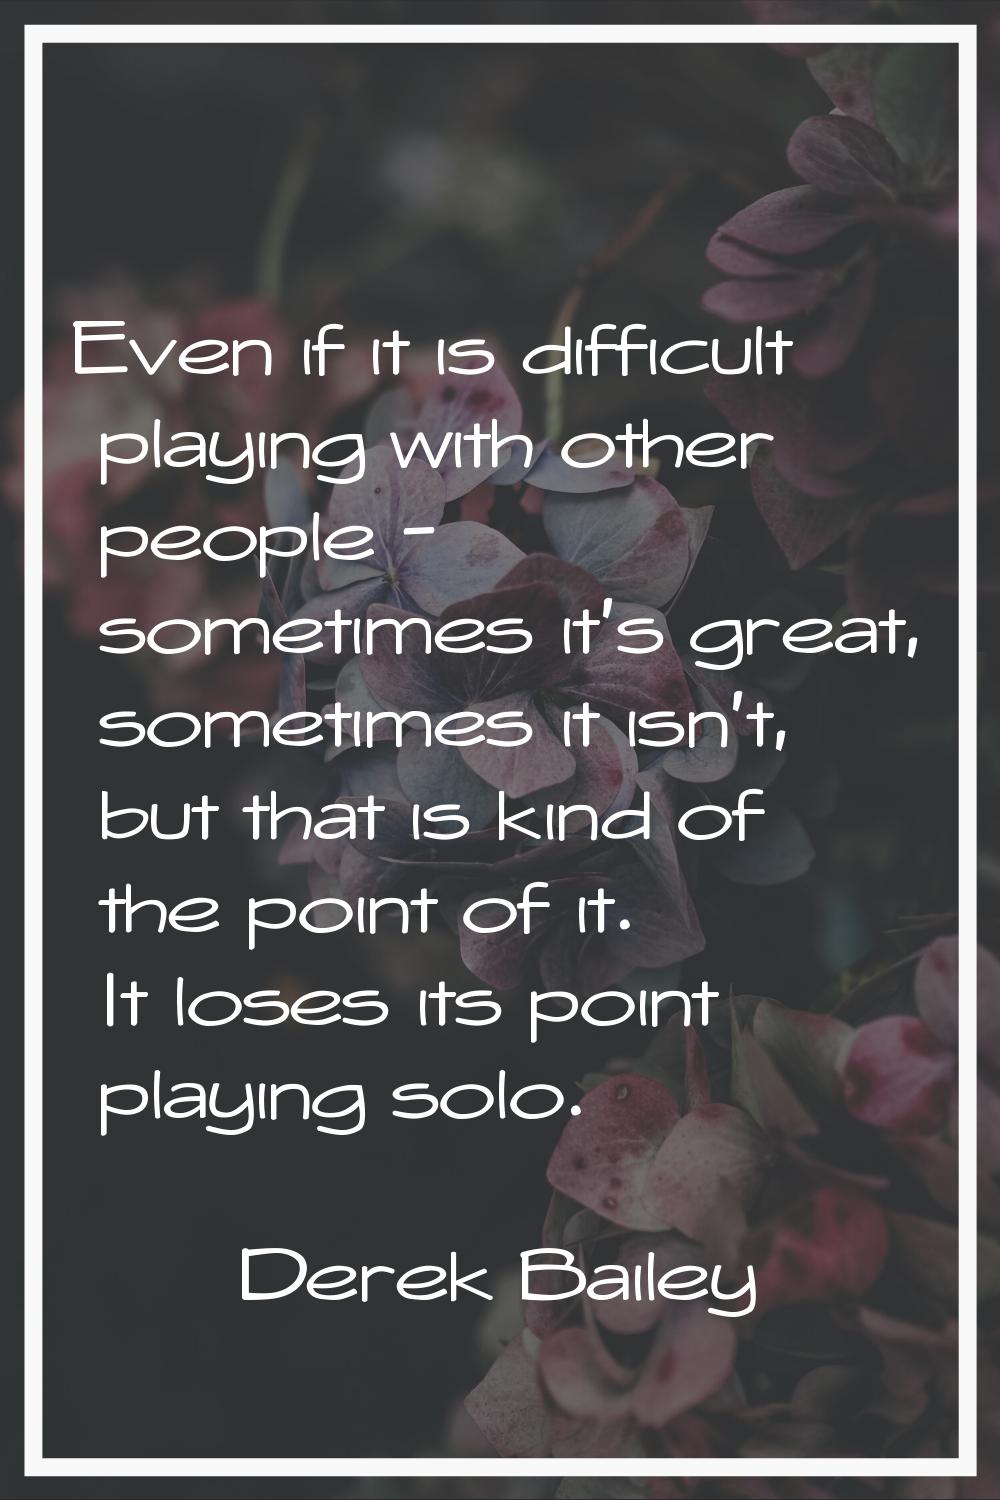 Even if it is difficult playing with other people - sometimes it's great, sometimes it isn't, but t